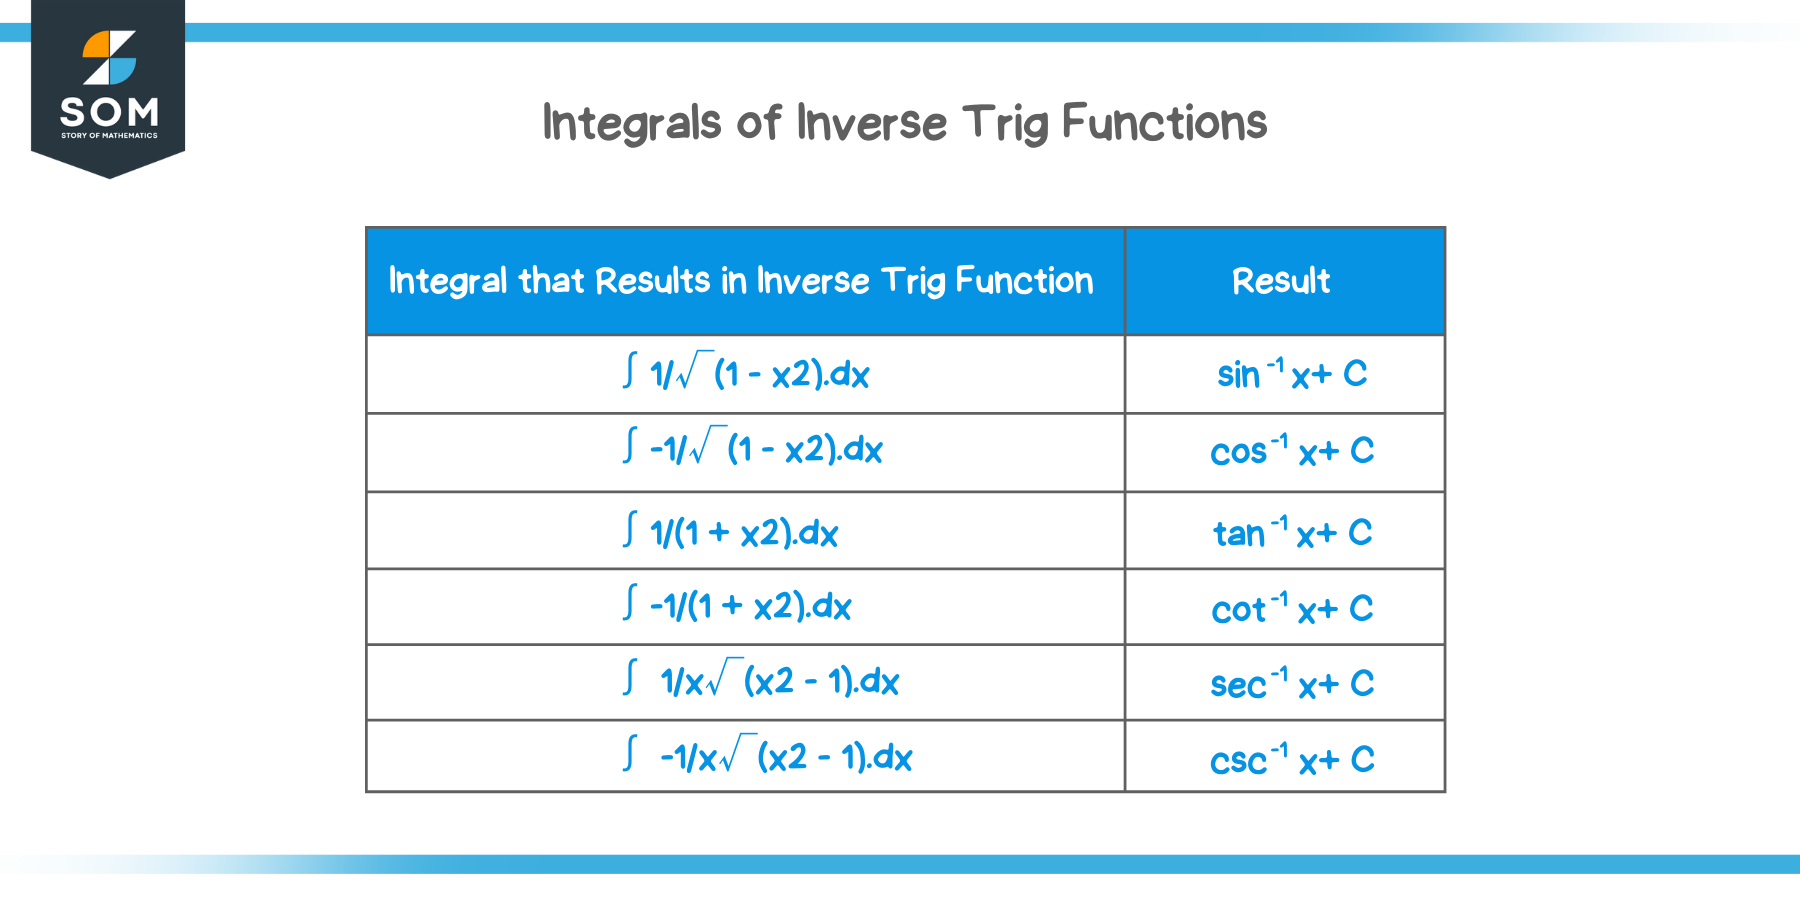 What are the integrals the result in an inverse trig function?